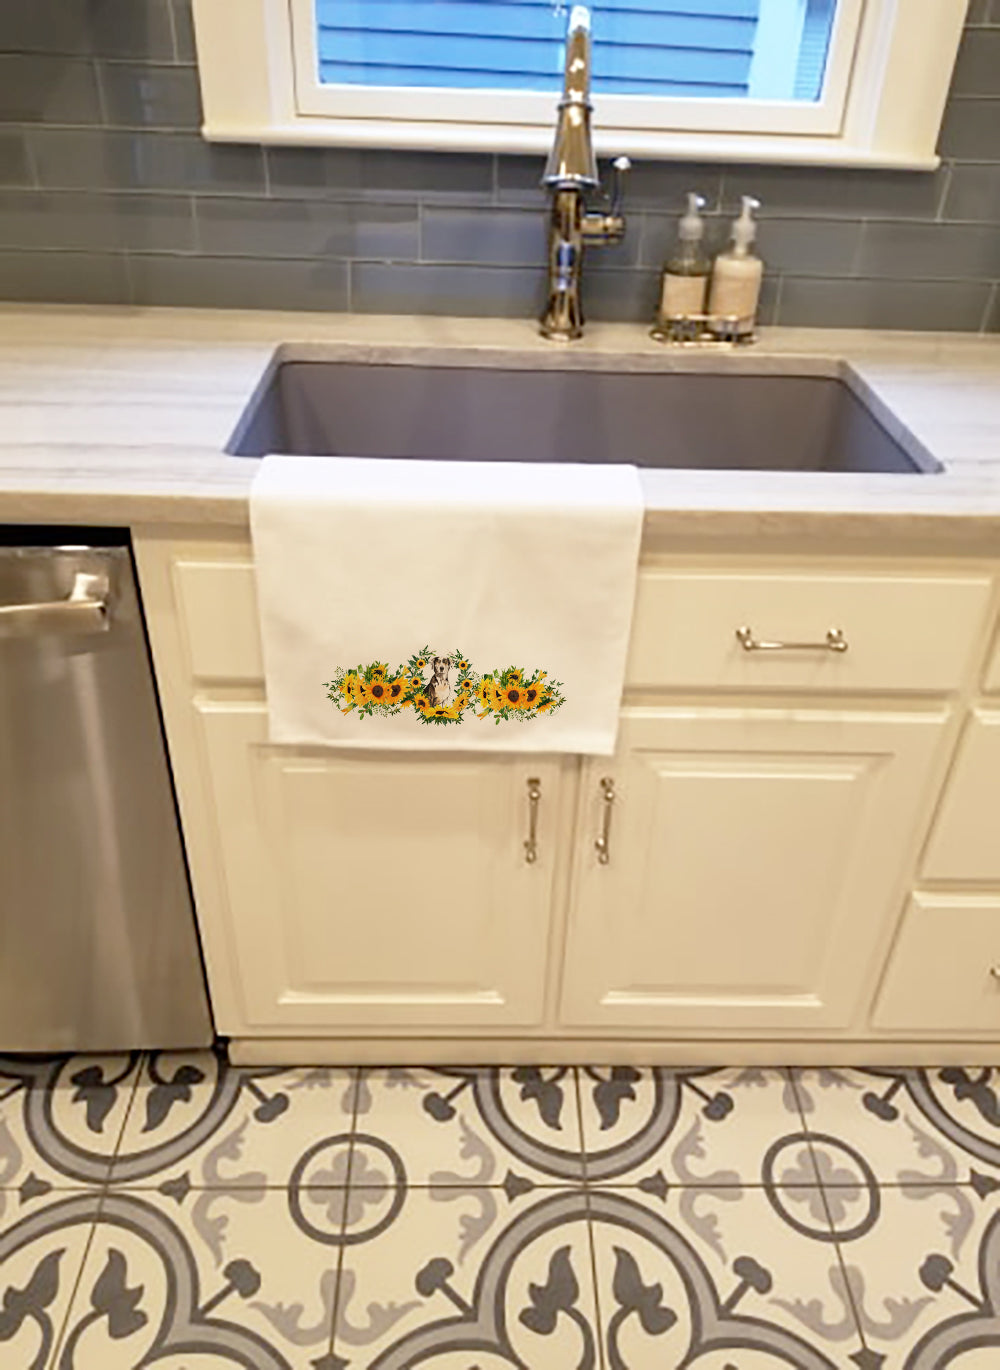 Catahoula Leopard Dog in Sunflowers White Kitchen Towel Set of 2 - the-store.com